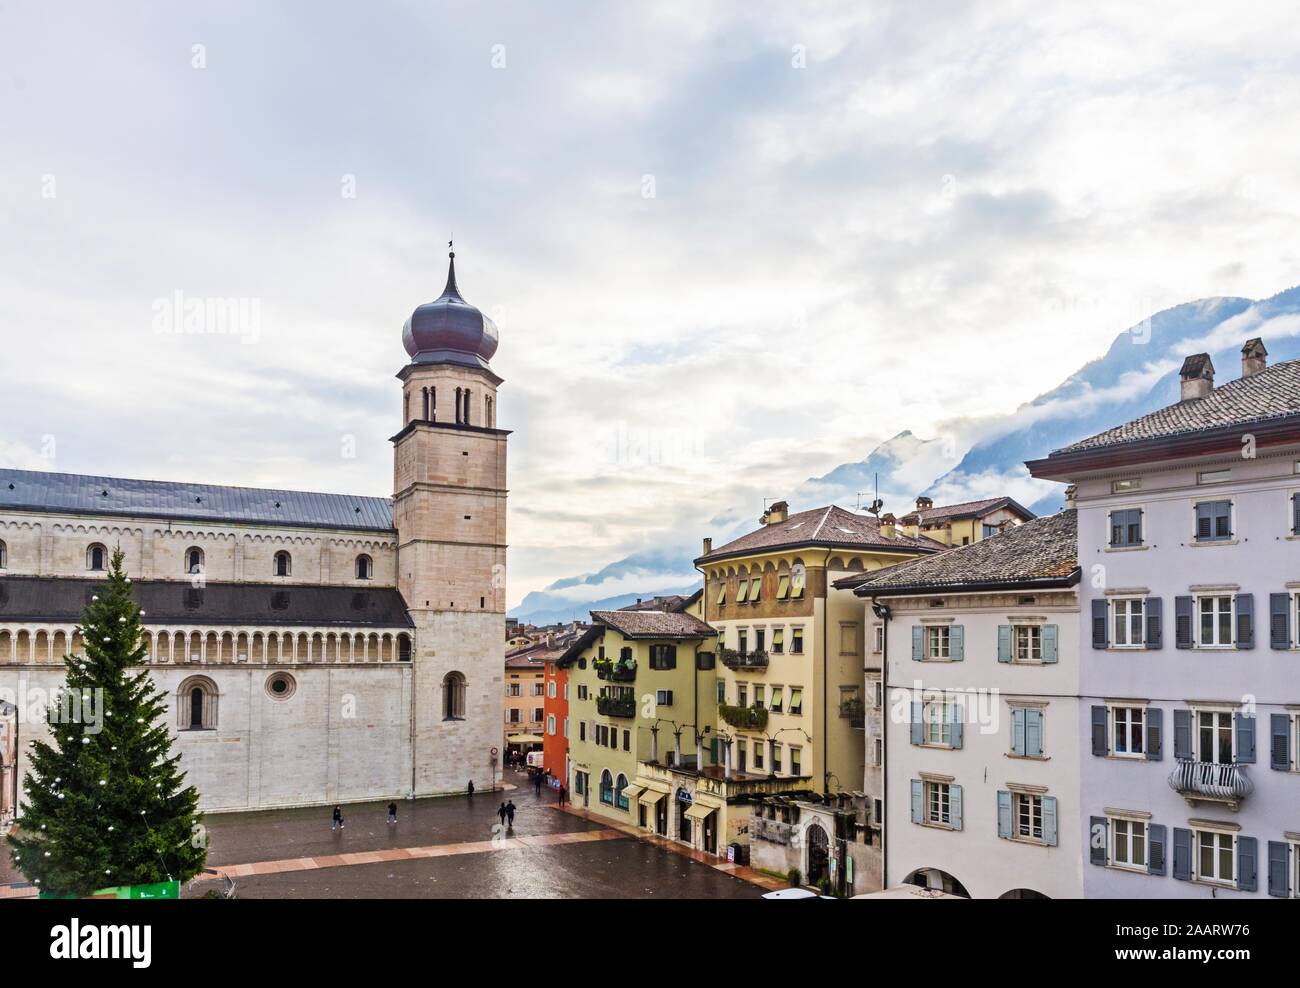 Trento, Italy (21st November 2019) - Piazza Duomo, main Trento's square, with the cathedral, some of its old houses and the Alps in the background Stock Photo